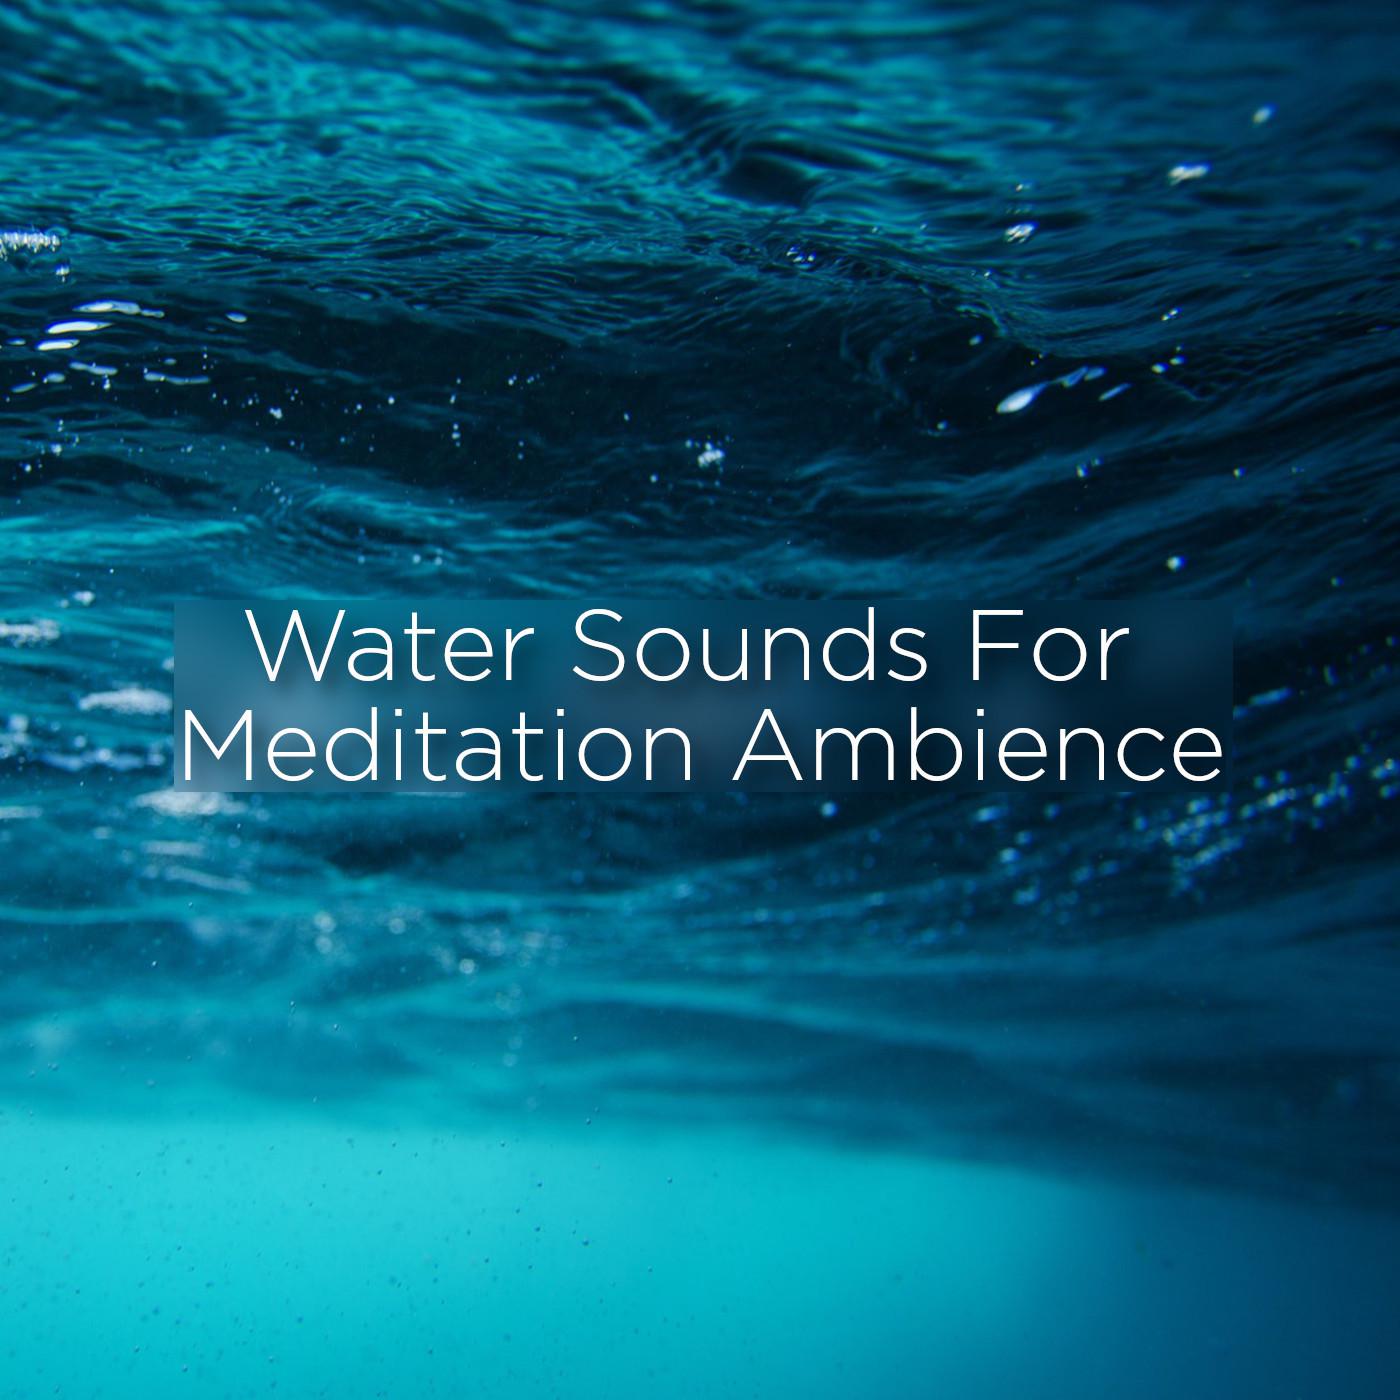 Water Sounds For Meditation Ambience